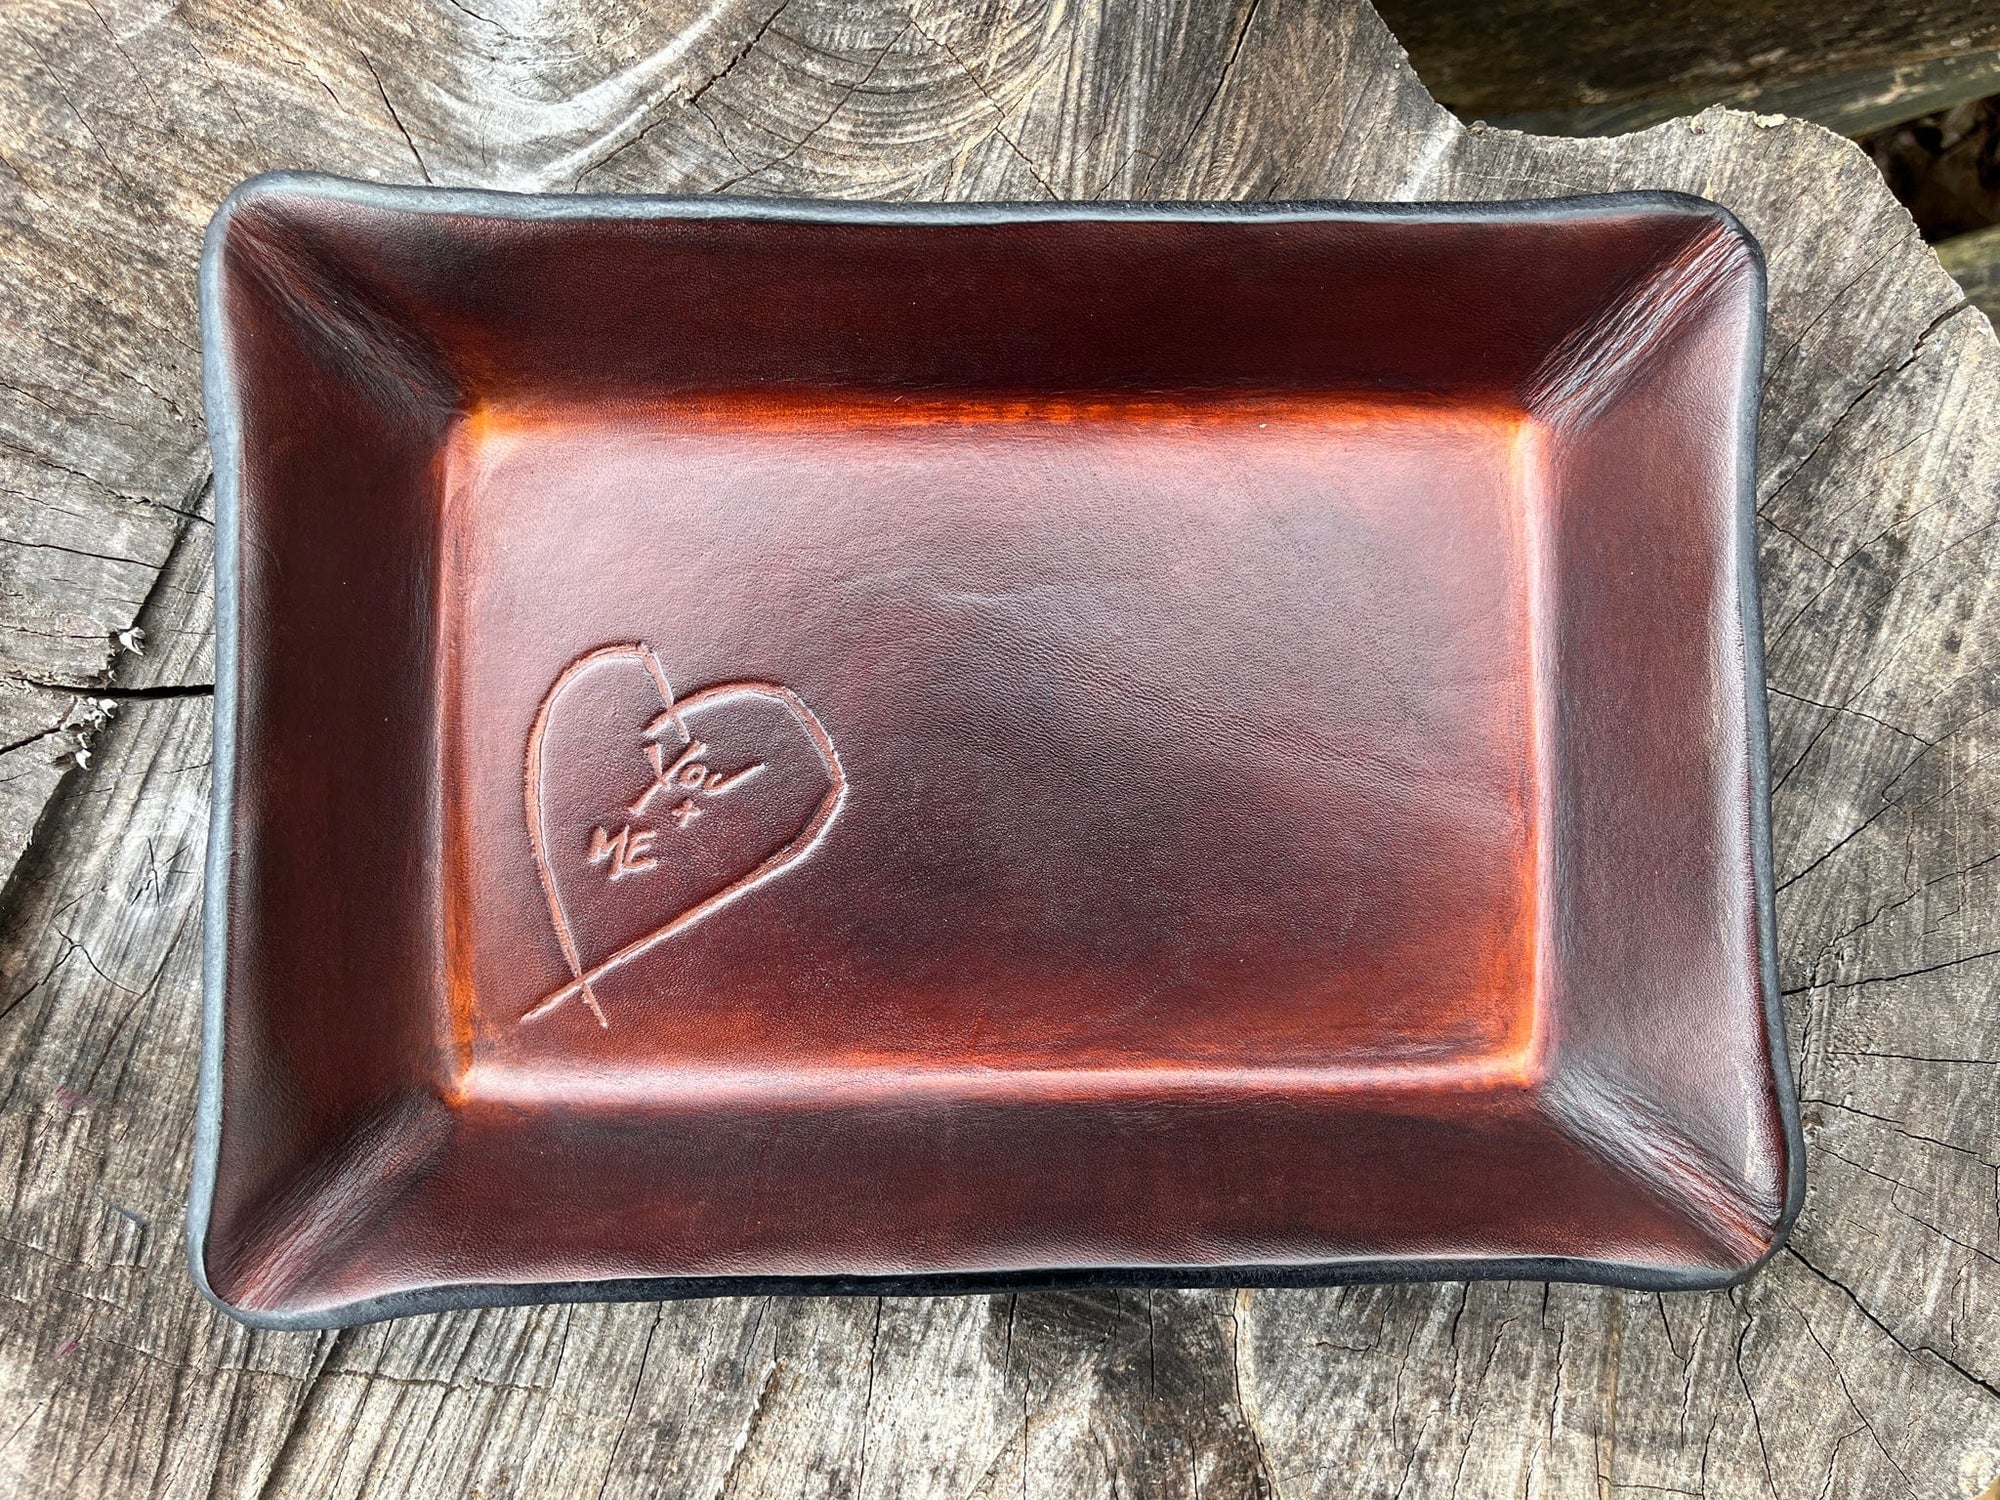 Third anniversary rectangular leather tray with heart